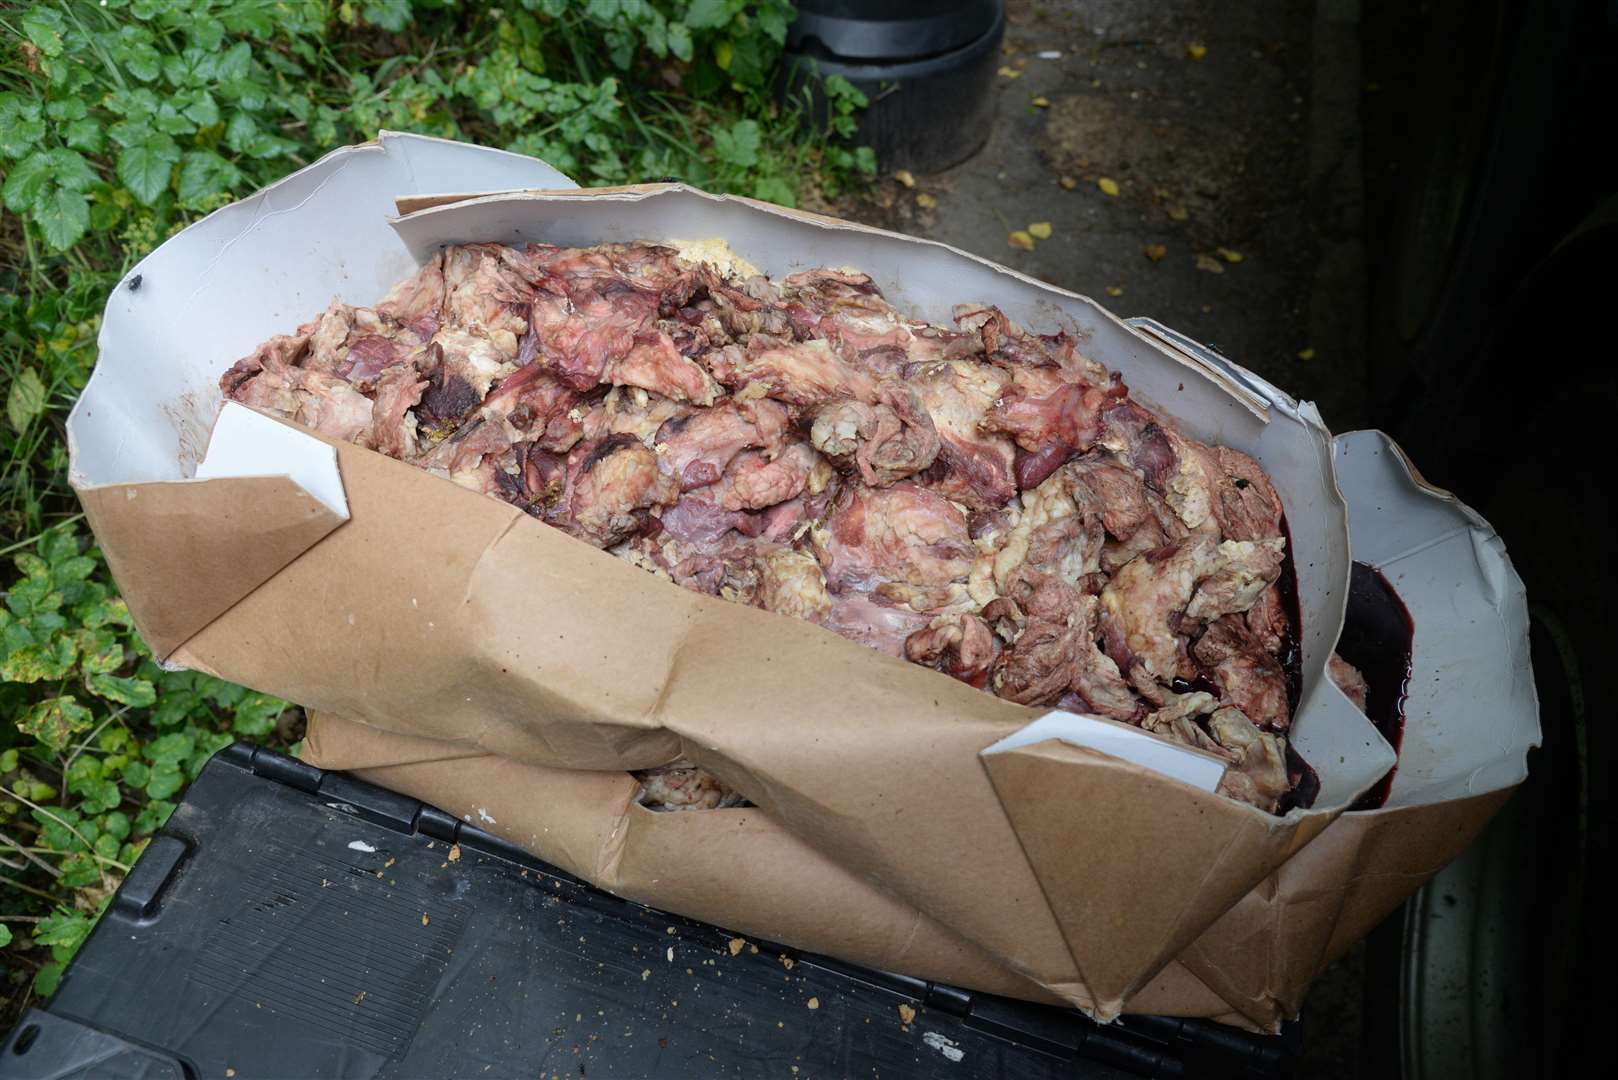 Rotting meat and vegetables have been dumped